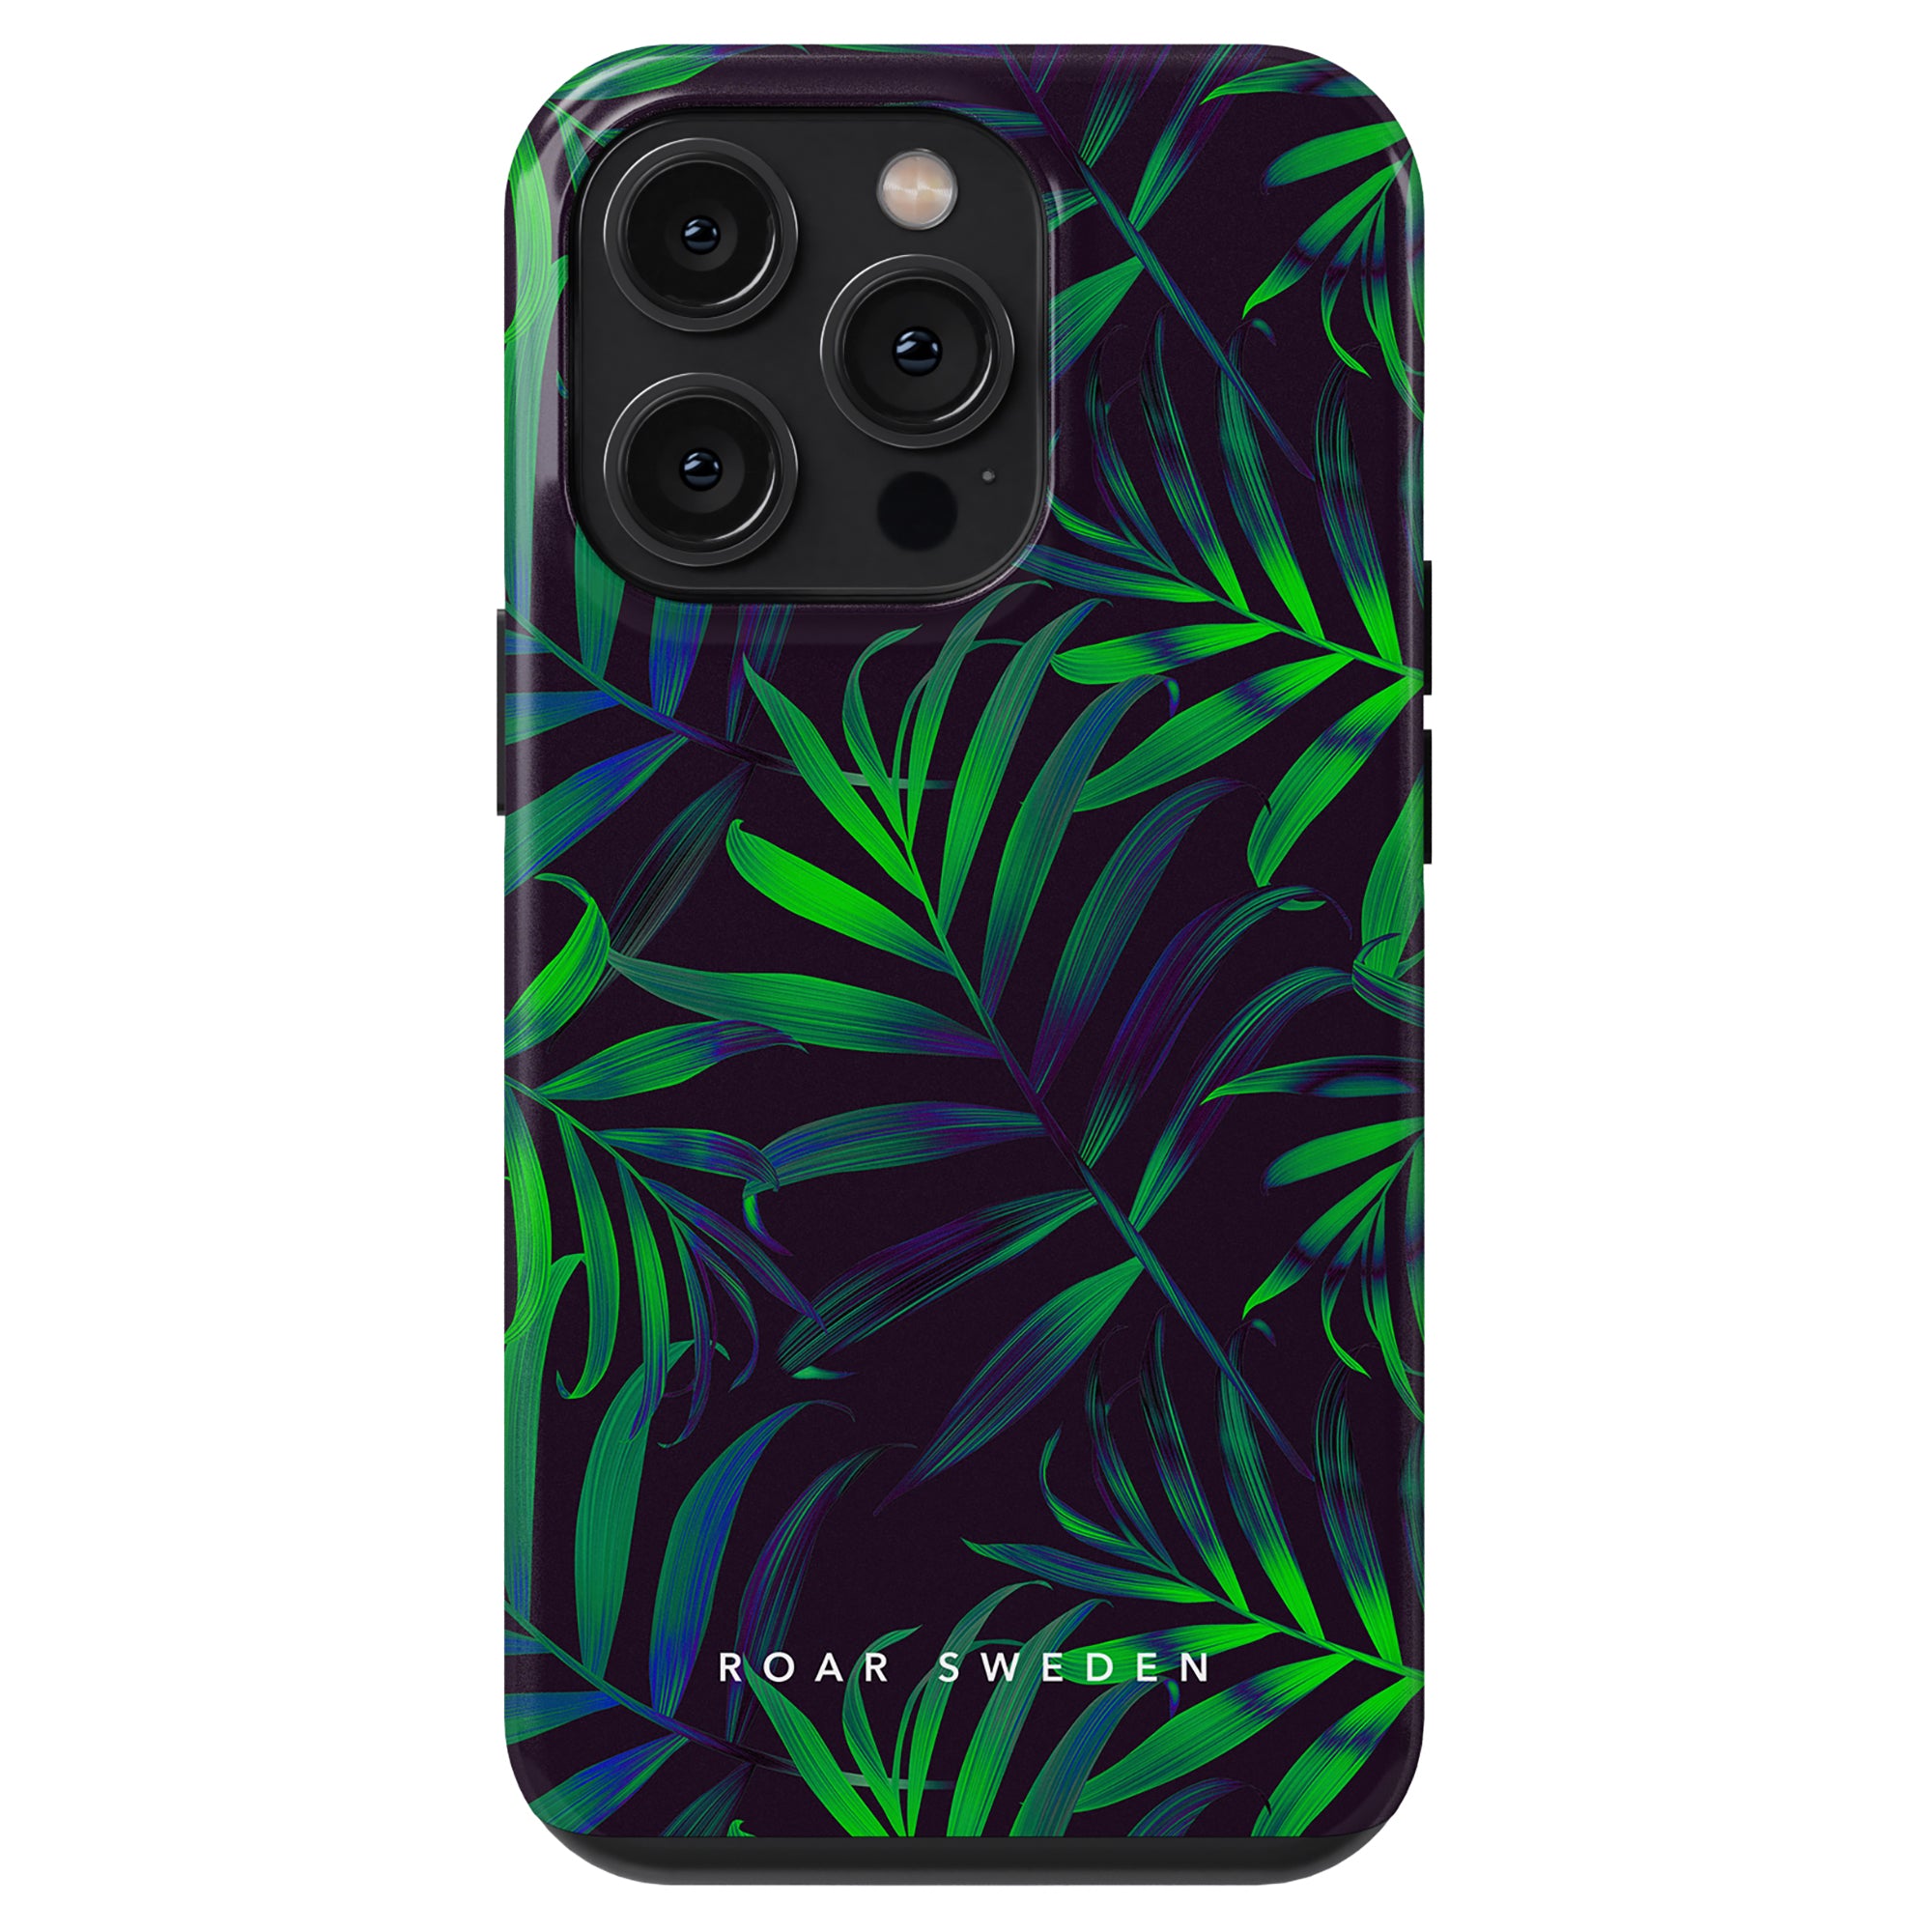 Smartphone with a Mysterious Jungle - Tough Case design.